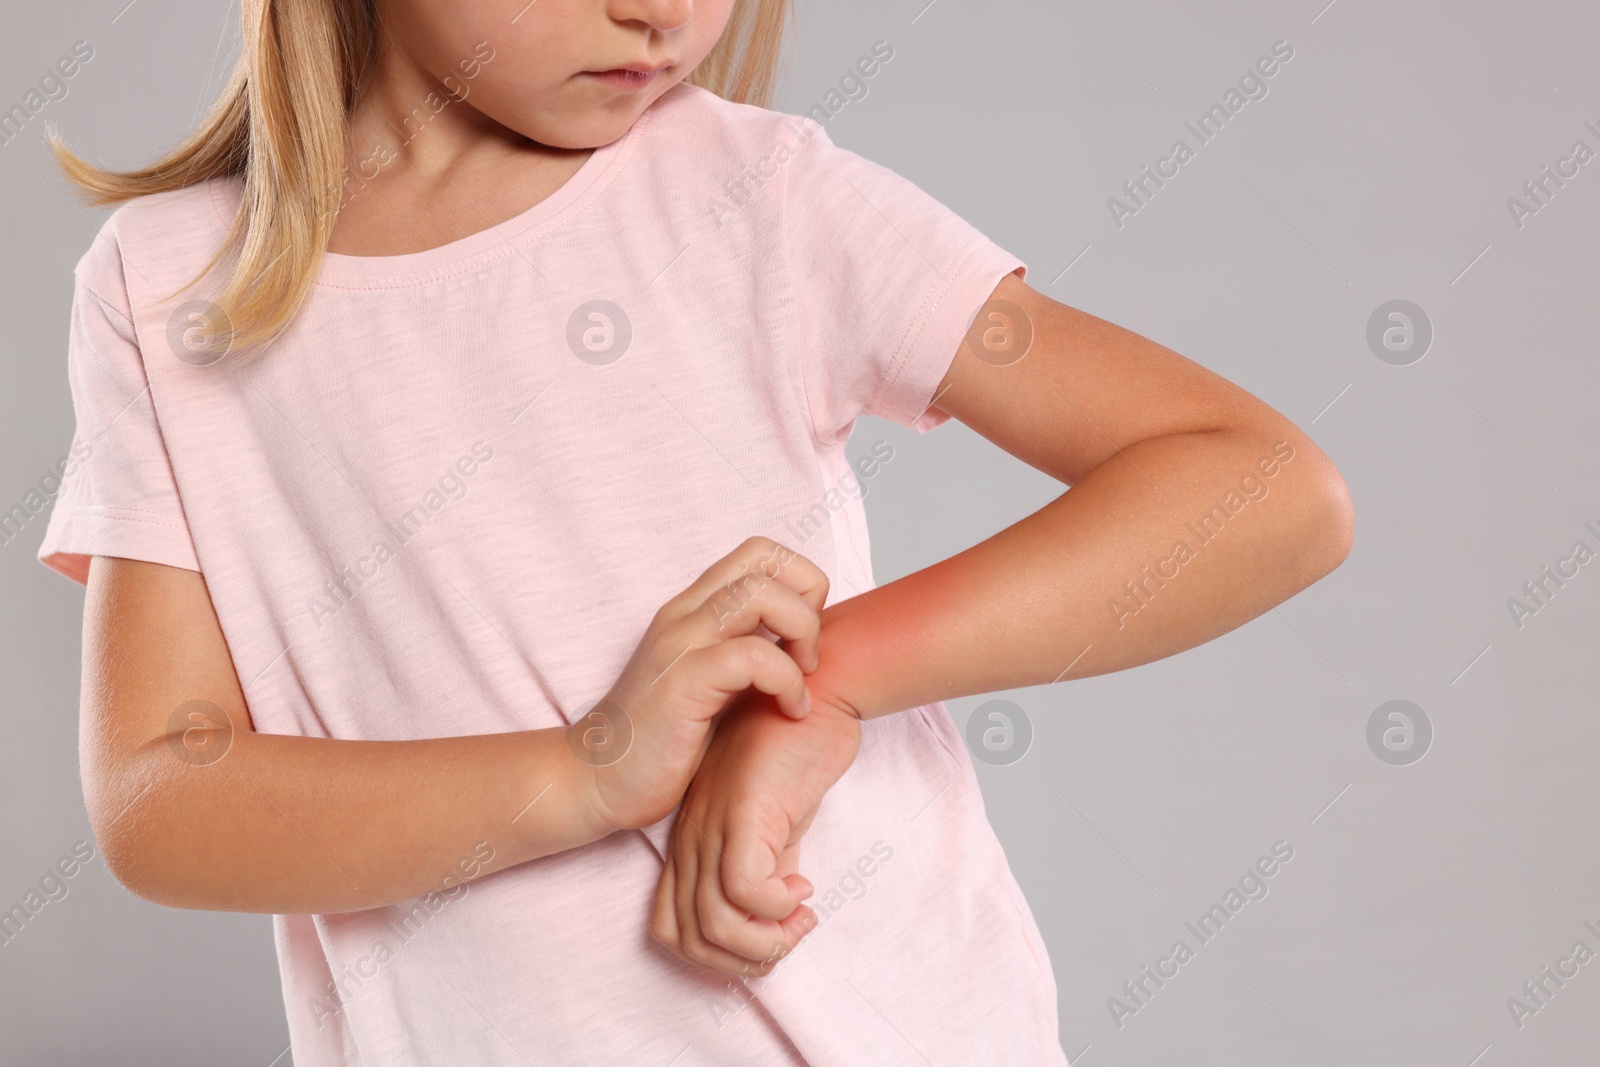 Photo of Suffering from allergy. Little girl scratching her hand on light gray background, closeup